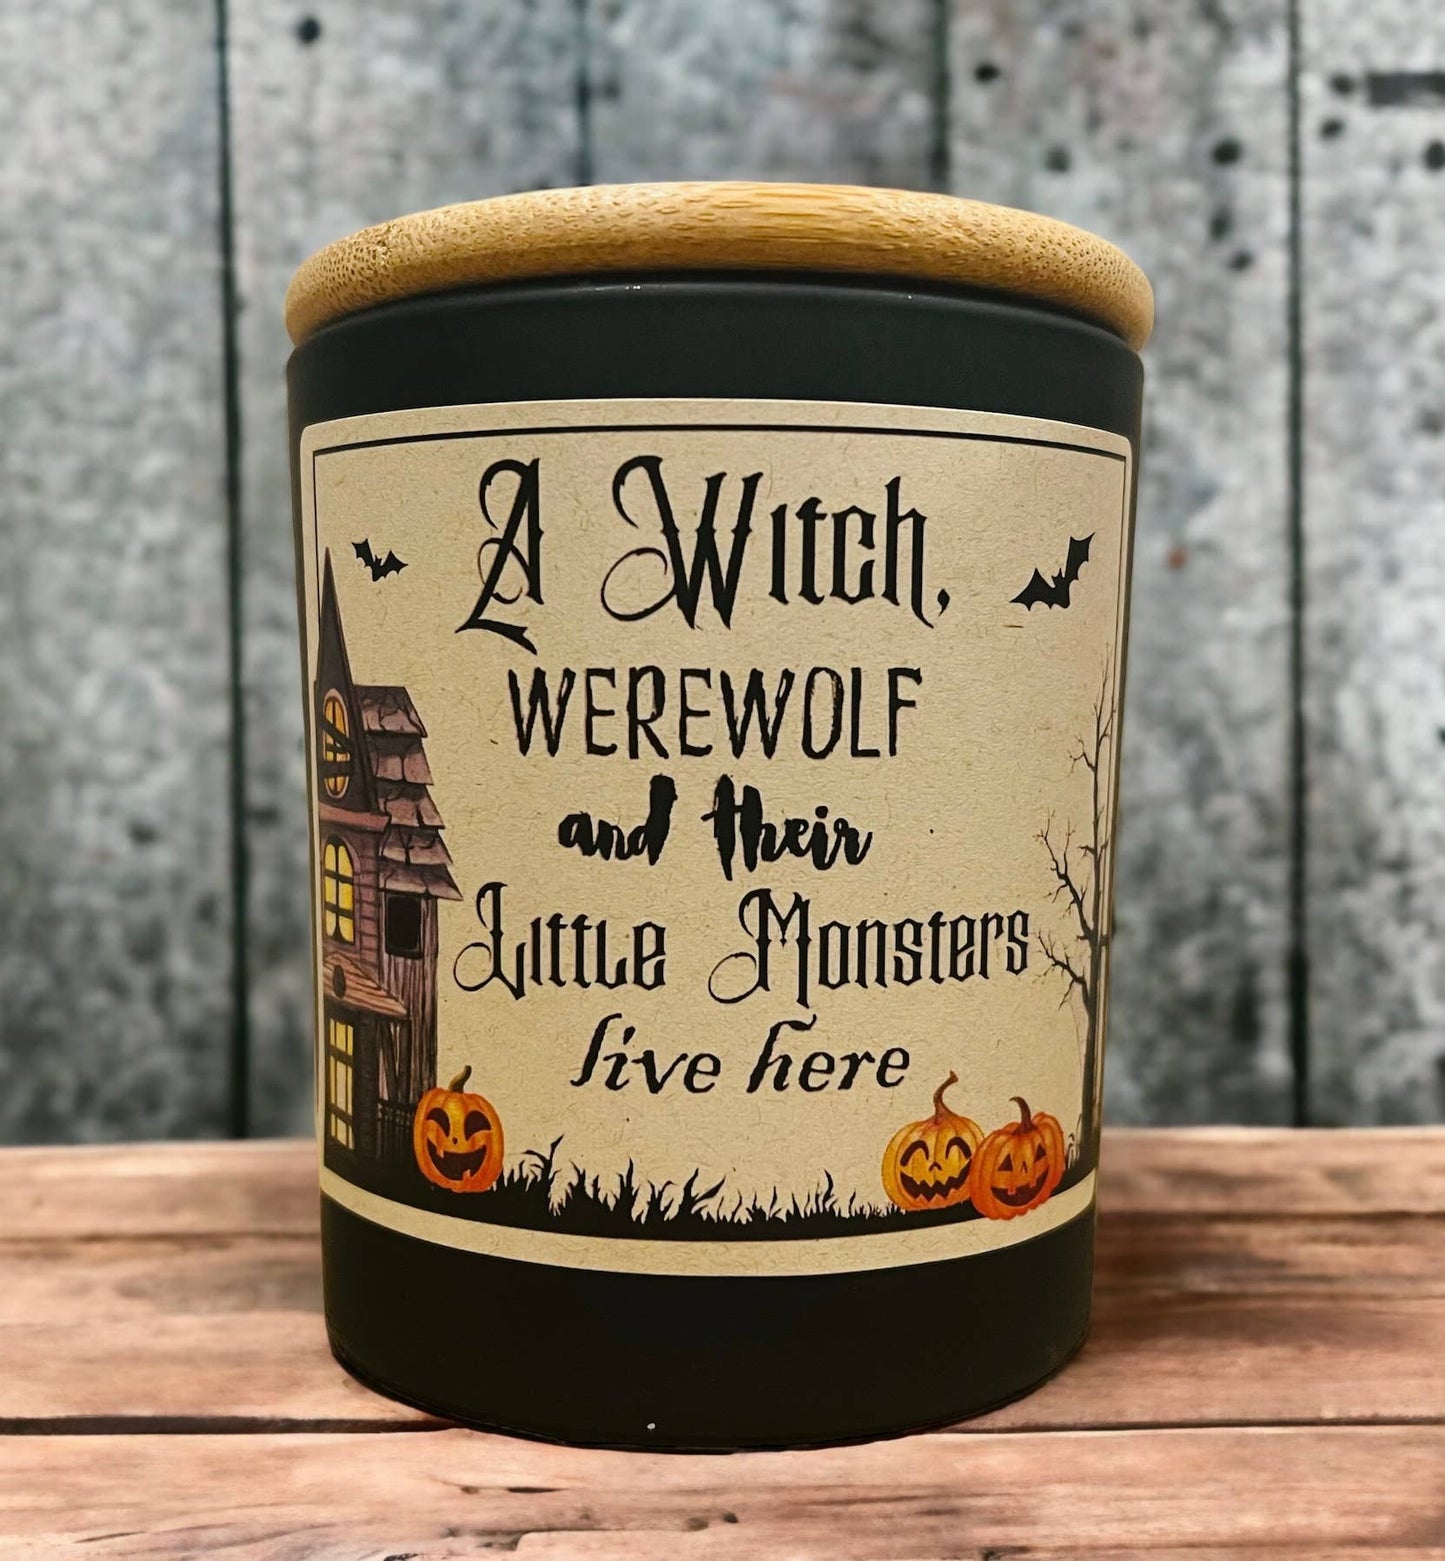 Witch, Werewolf and little Monsters Candle